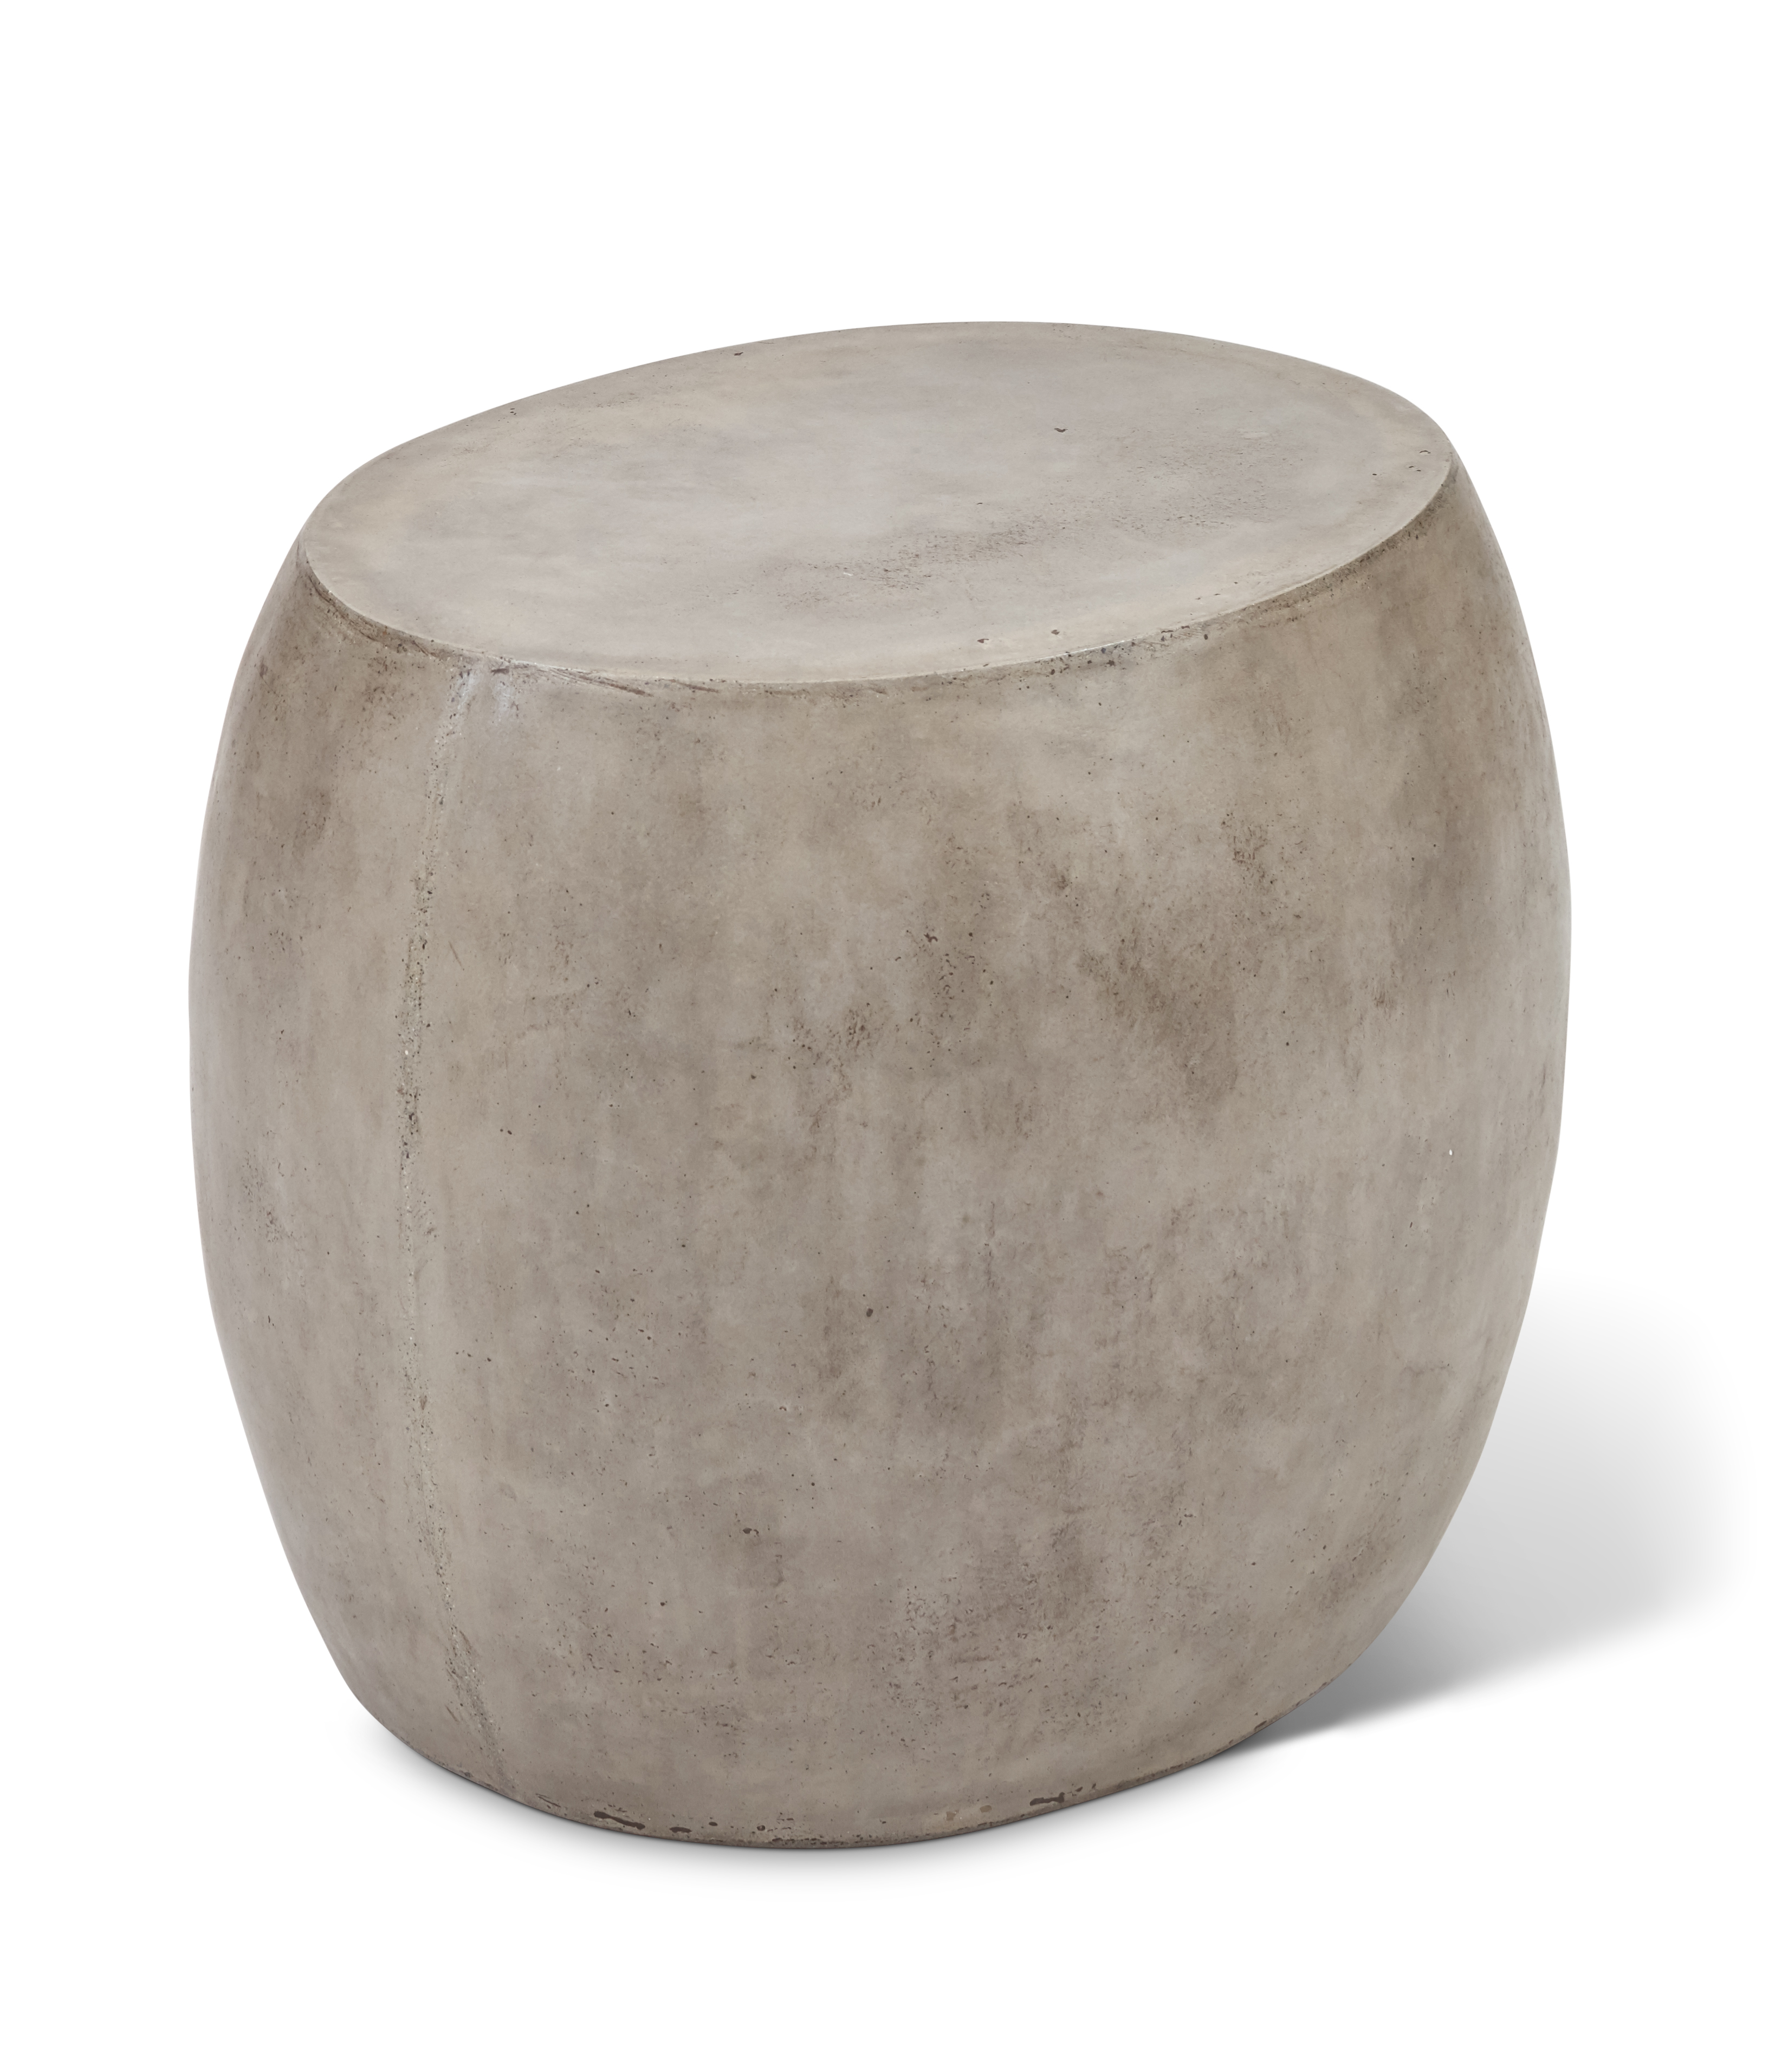 pebble urbia furniture vgs outdoor side table concrete occasional tables gray end mixx affordable resin wood and metal round brass drum baroque natural accent nesting ikea silver